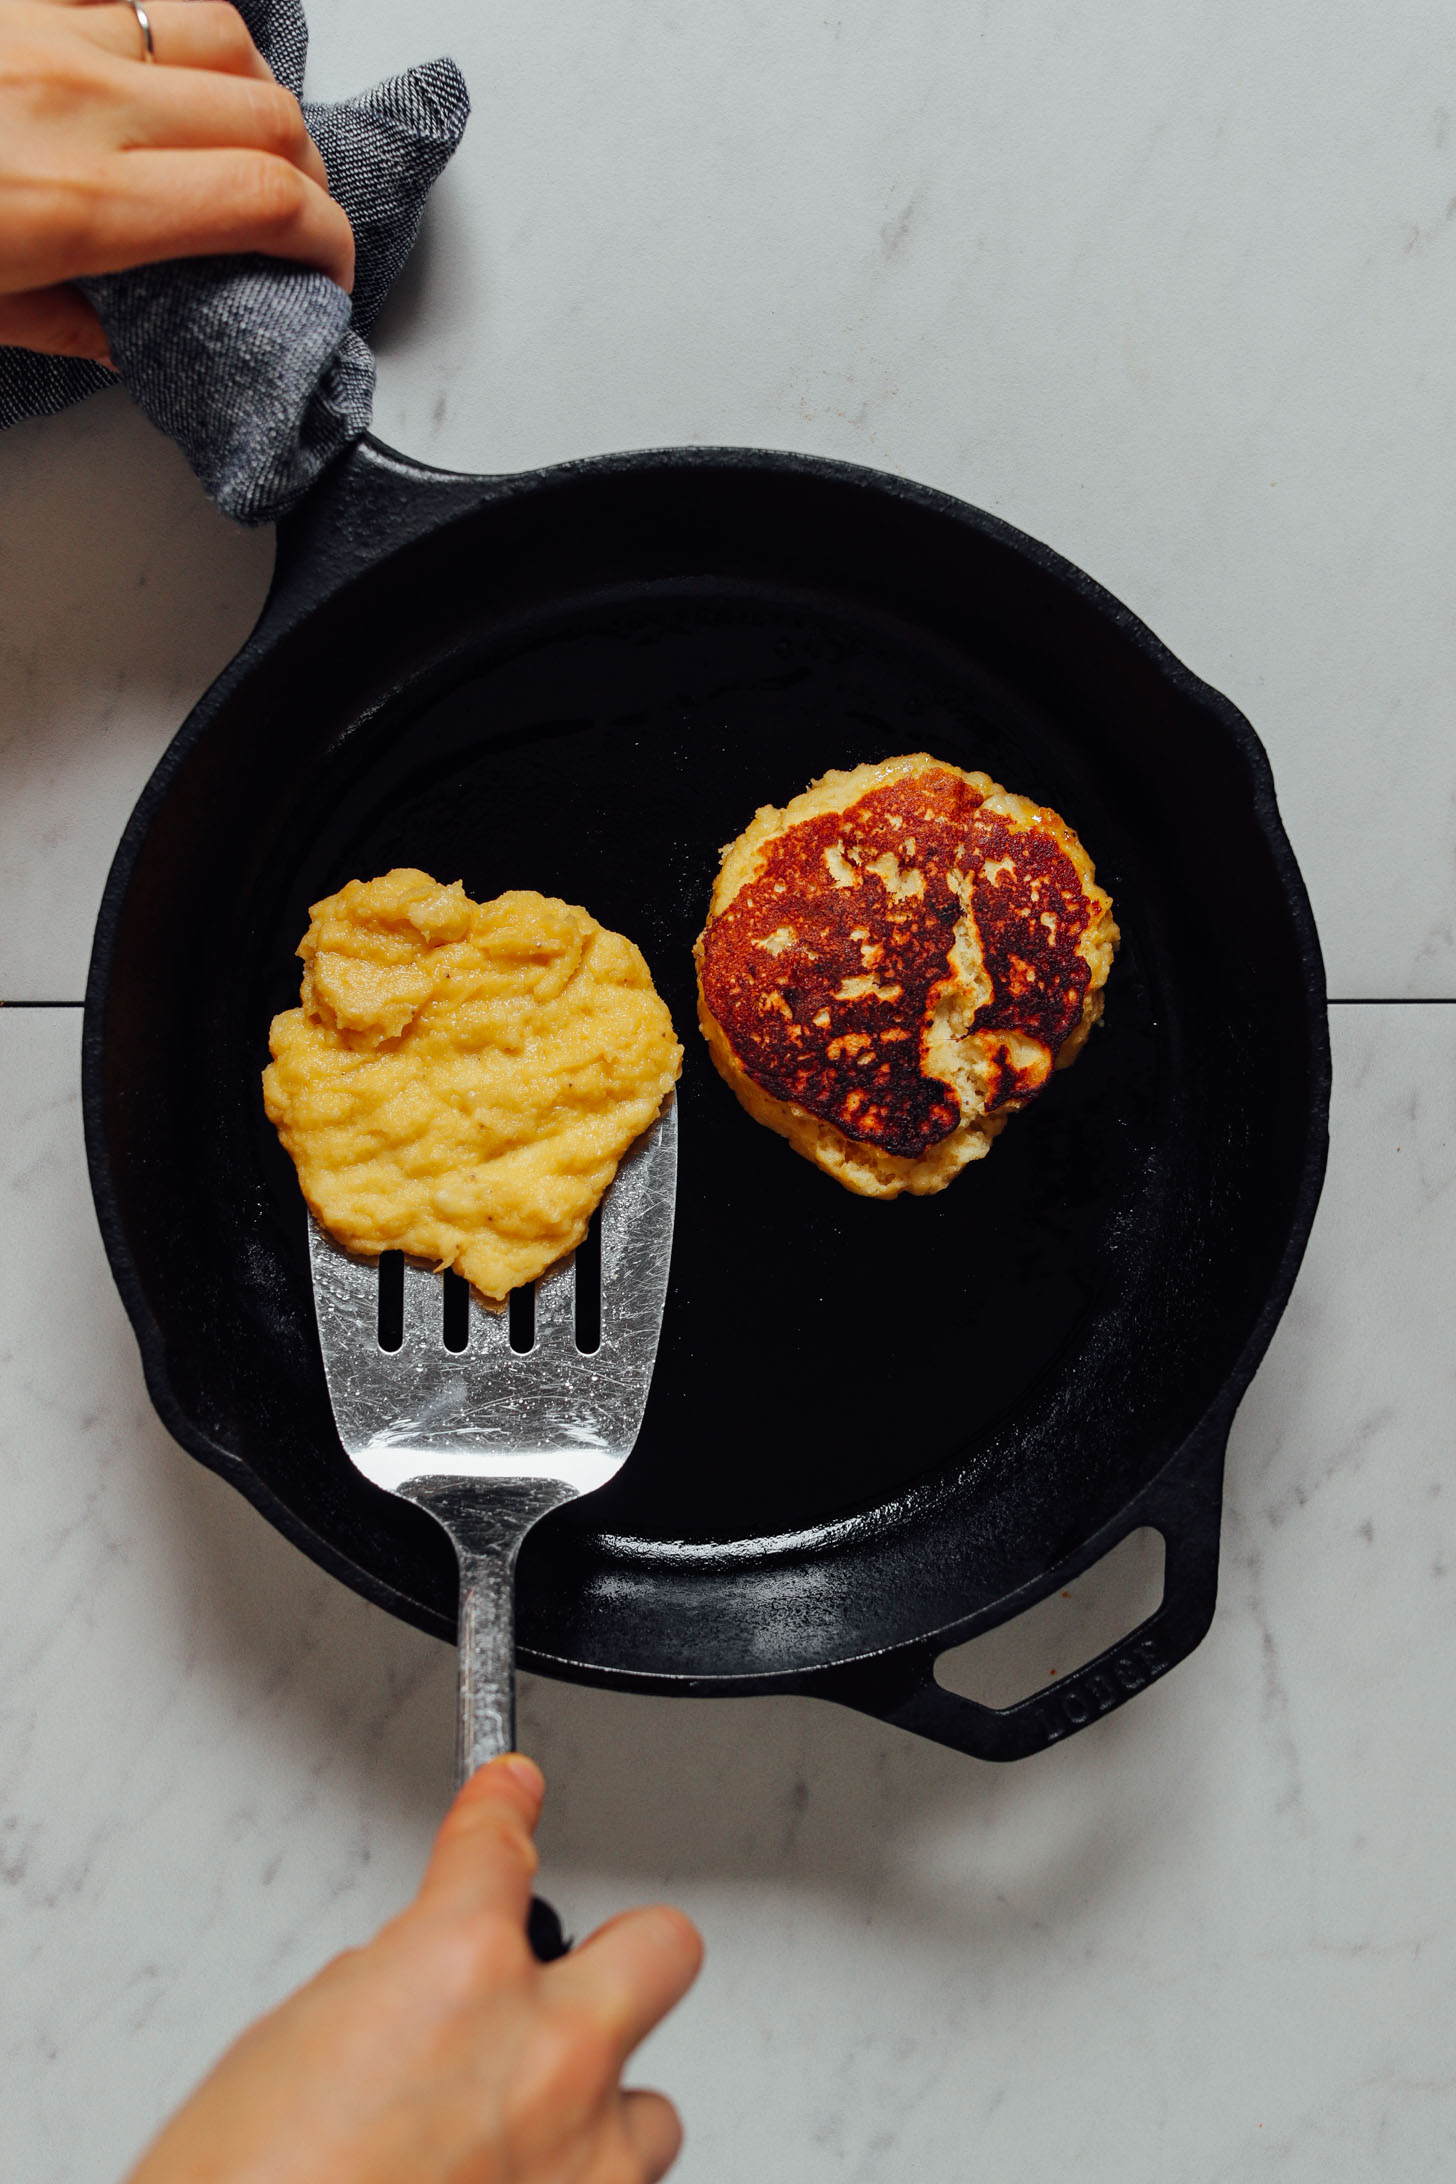 Using a metal spatula to flip a Banana Egg Pancake in a cast-iron skillet